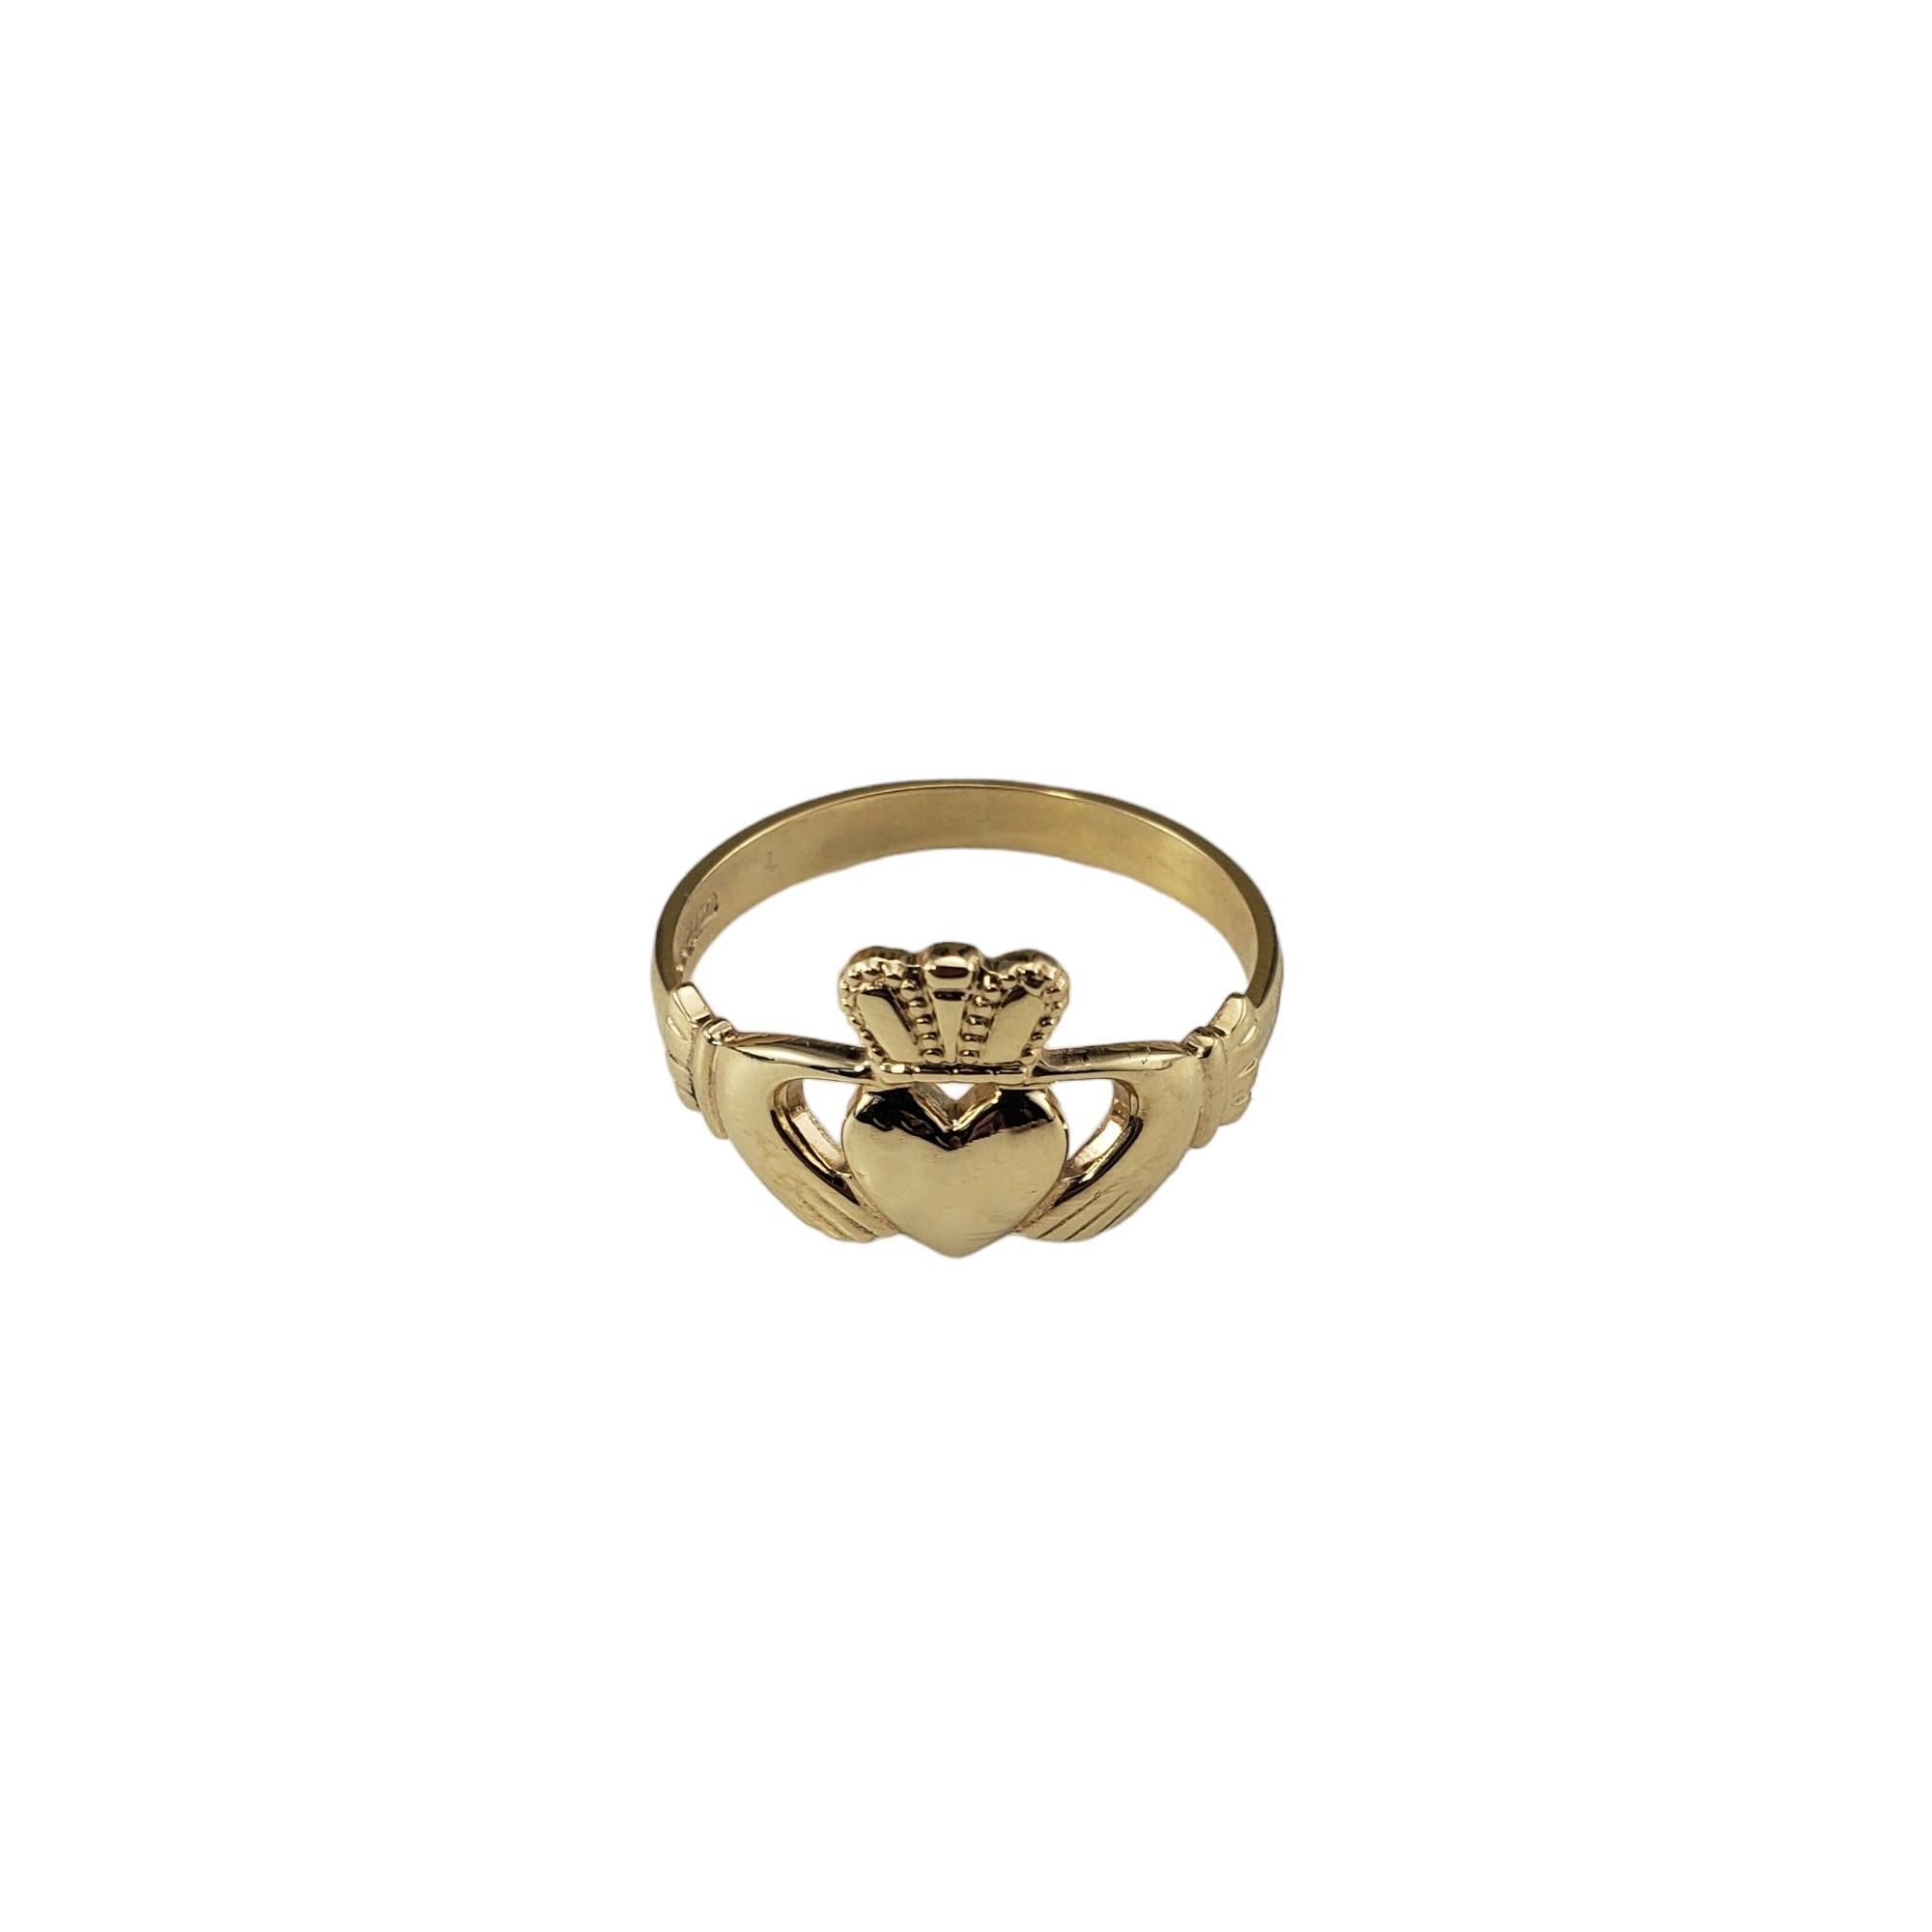 Men's 10 Karat Yellow Gold Claddagh Ring Size 12.75-13

This elegant men's Claddagh ring is crafted in beautifully detailed 10K yellow gold. 

Width: 22 mm.  
Shank: 3 mm.

Size:  12.75-13

Stamped: Made in Ireland  JC  10 417

Weight:  3.0 dwt./